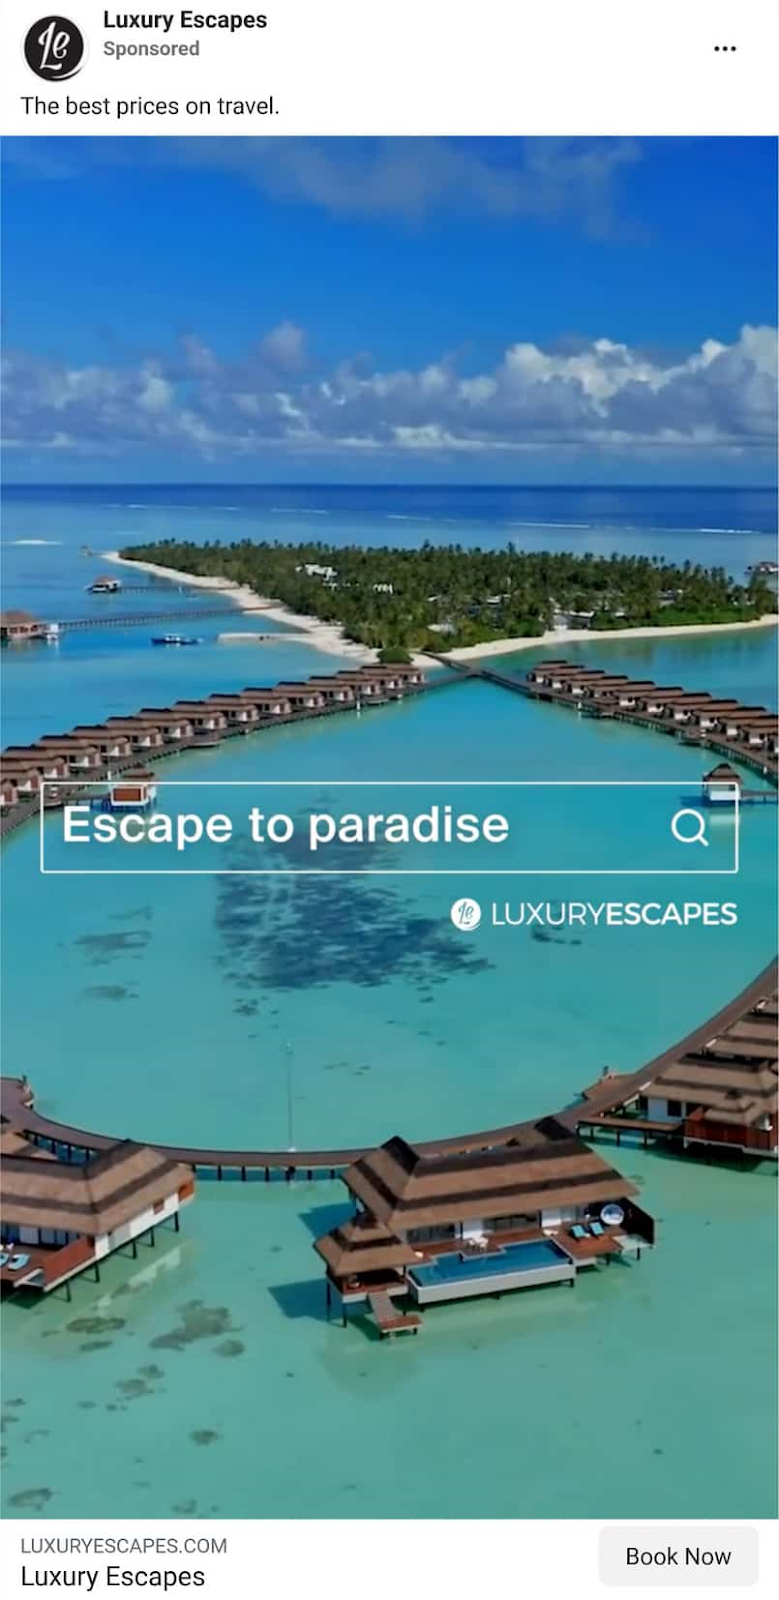 Luxury Escapes's Instagram ad for the best prices on travel